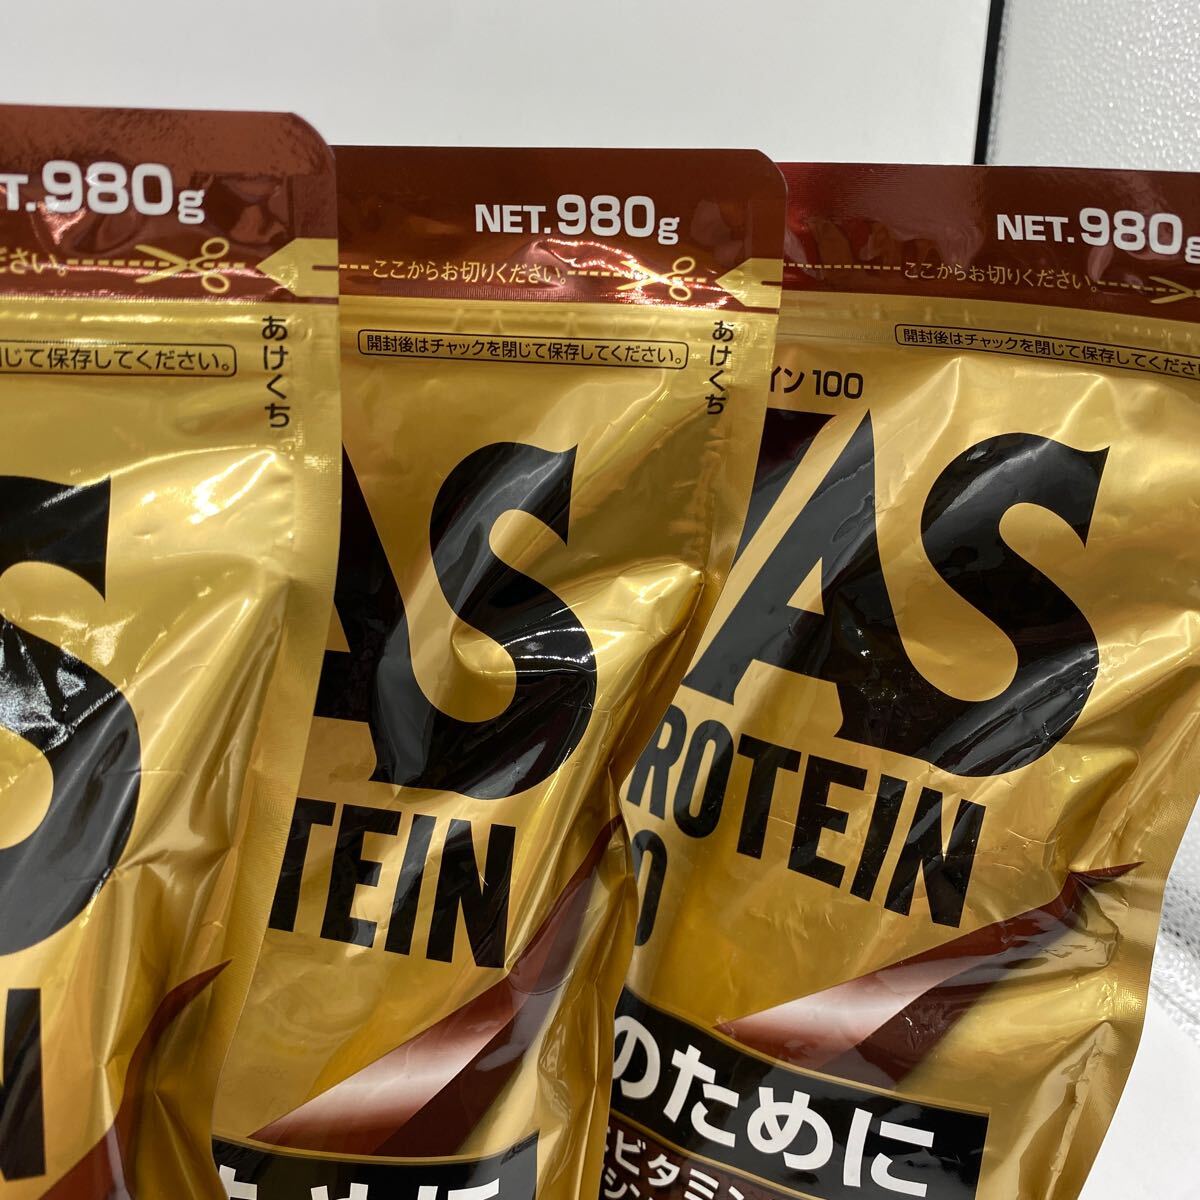 A0955 unopened health food The bus whey protein Ricci chocolate taste 980g × 3 sack best-before date 2025 year 06 month 2025 year 07 month SAVAS WHEY PROTEIN